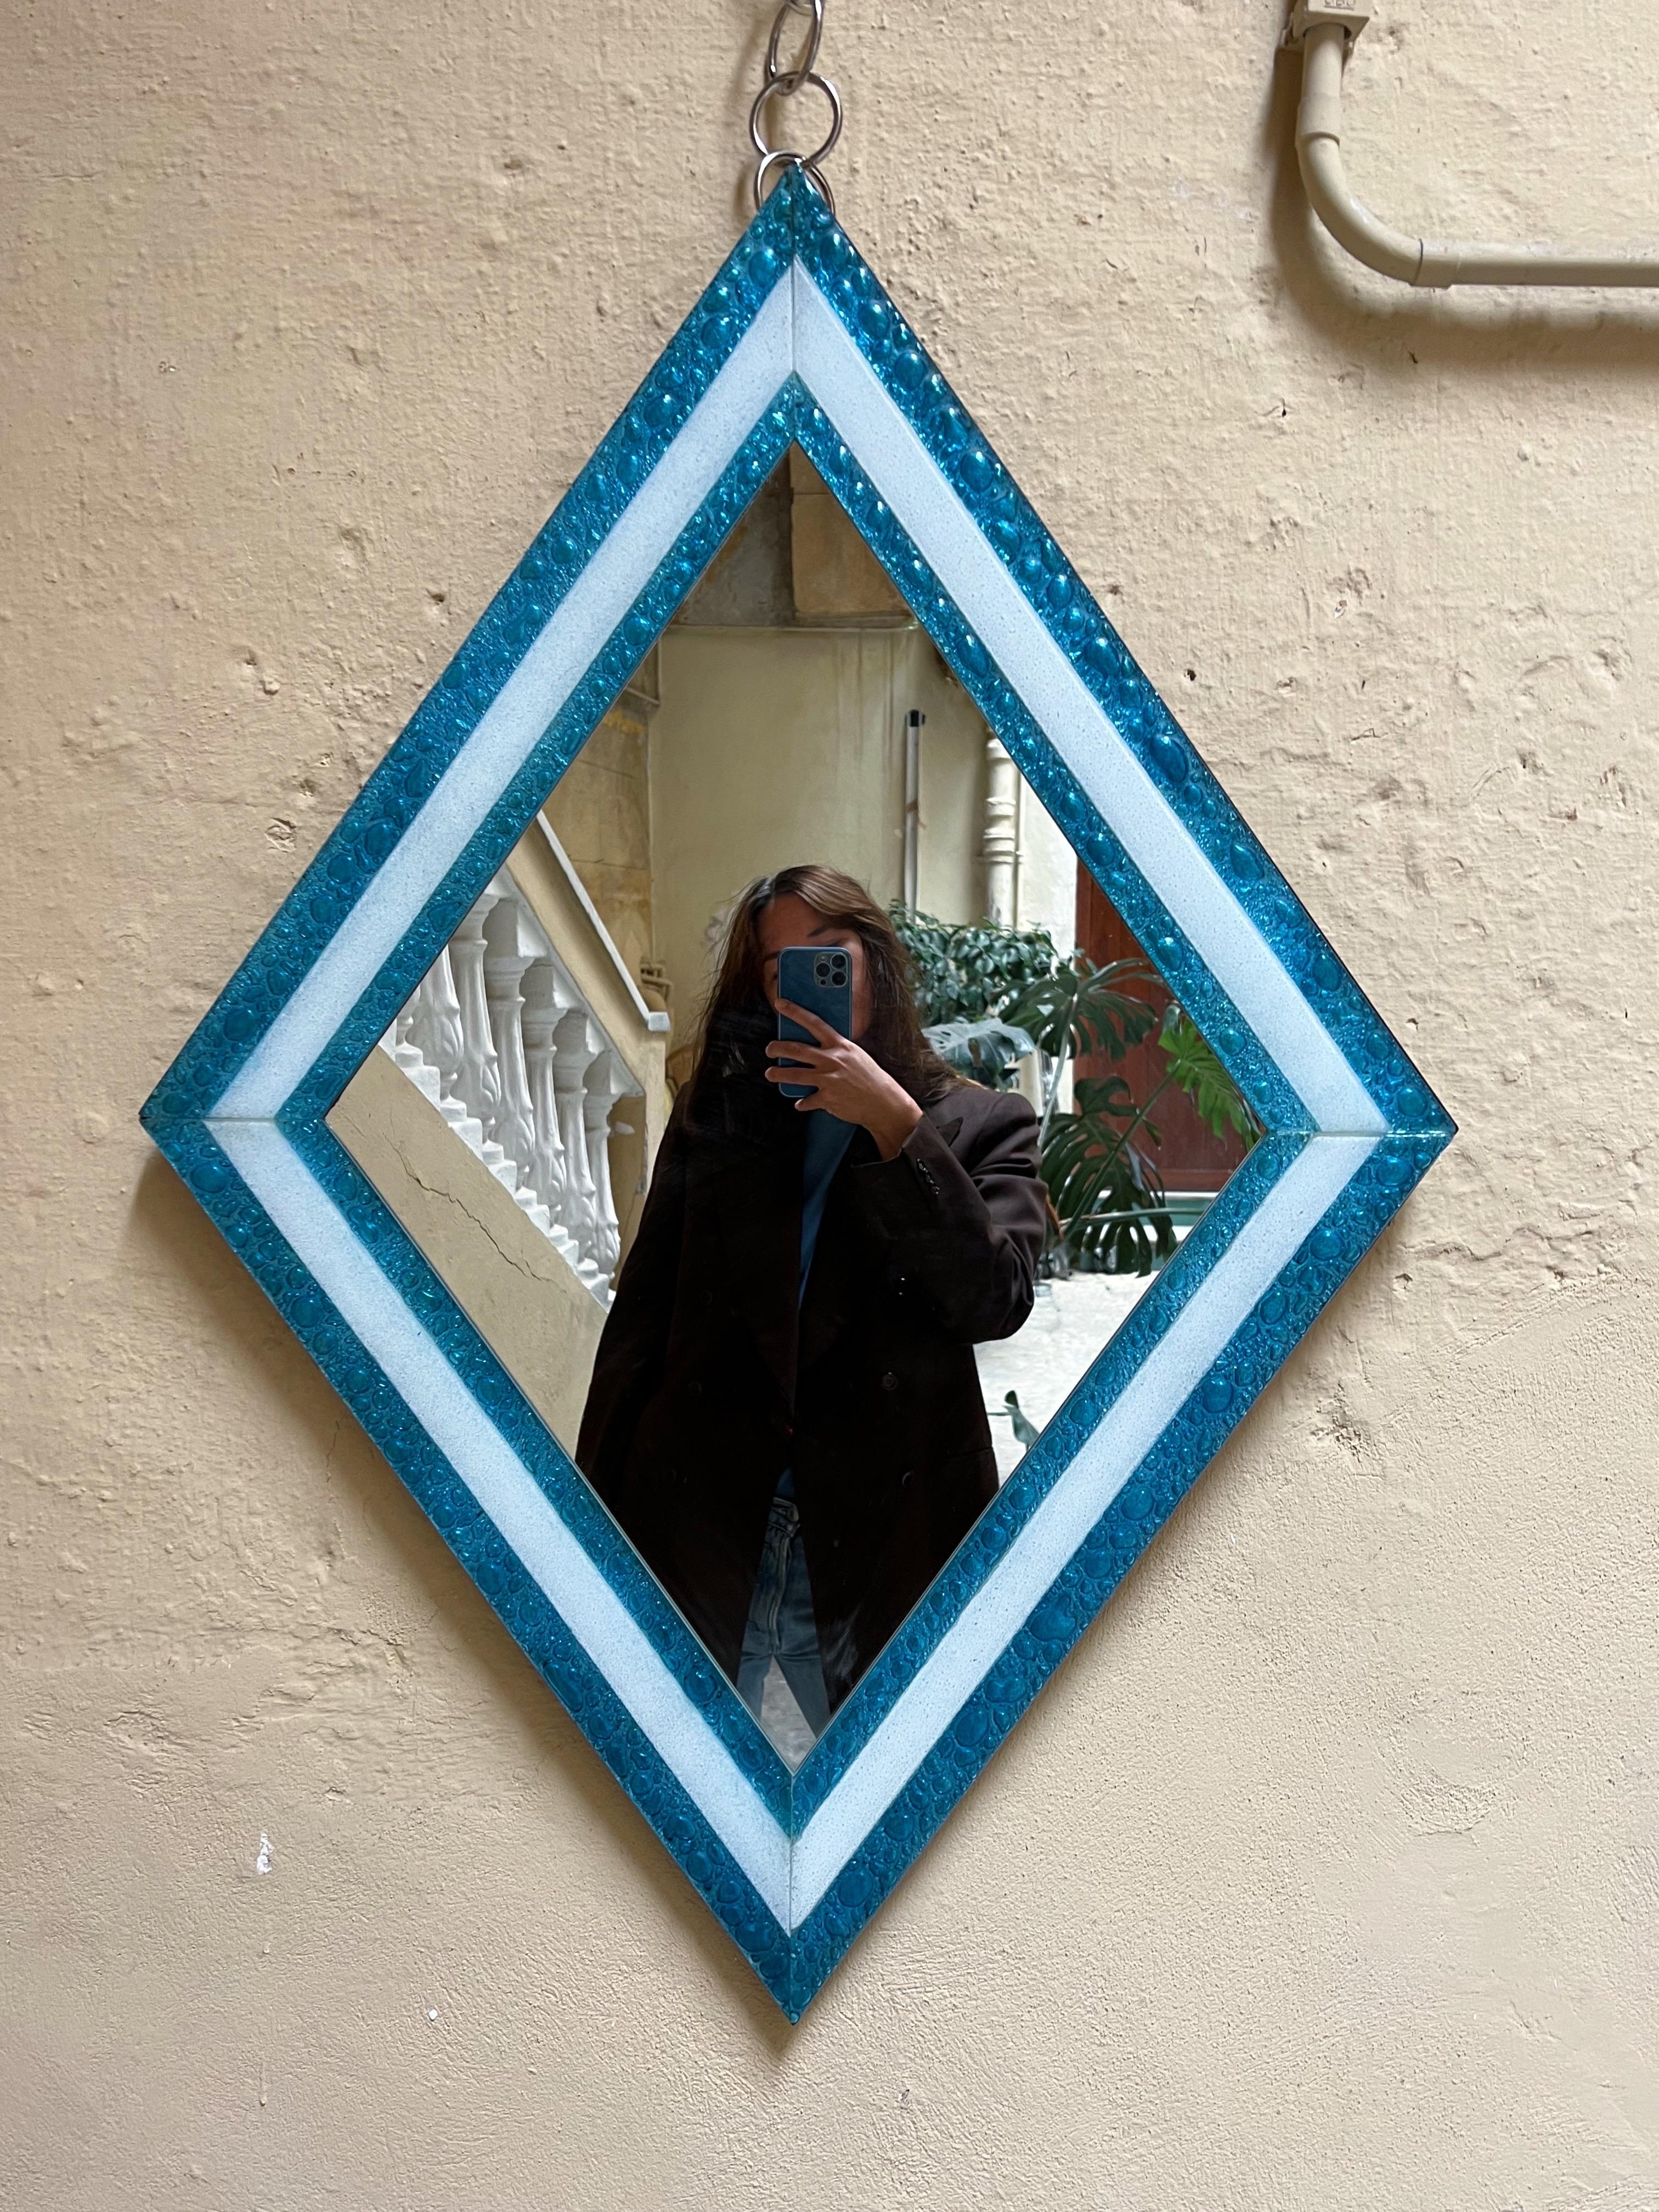 Diamond-shaped wall mirror from La Murrina, 1980s. The glass frame is highly decorative with its amazing structure in the glass. Aquamarine strong blue color with white contrast. Wooden backside. In very good vintage condition.